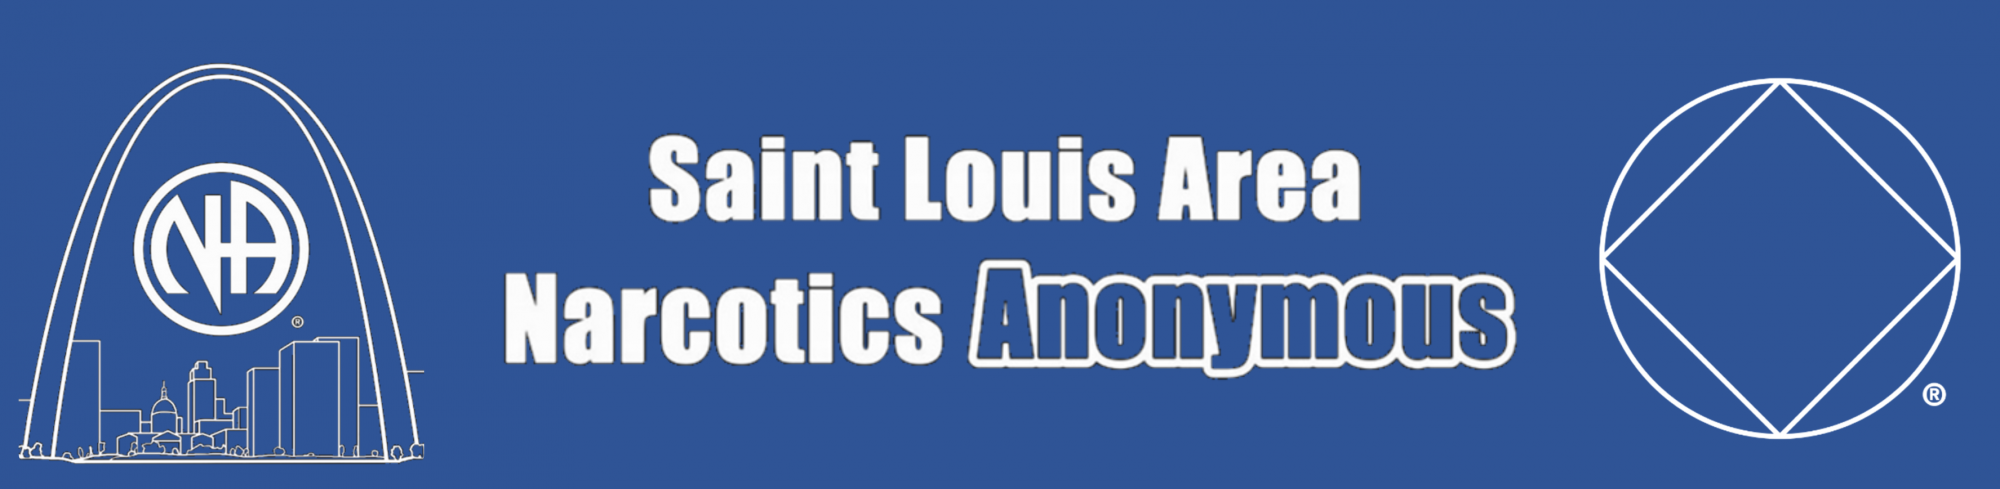 St. Louis Area of Narcotics Anonymous